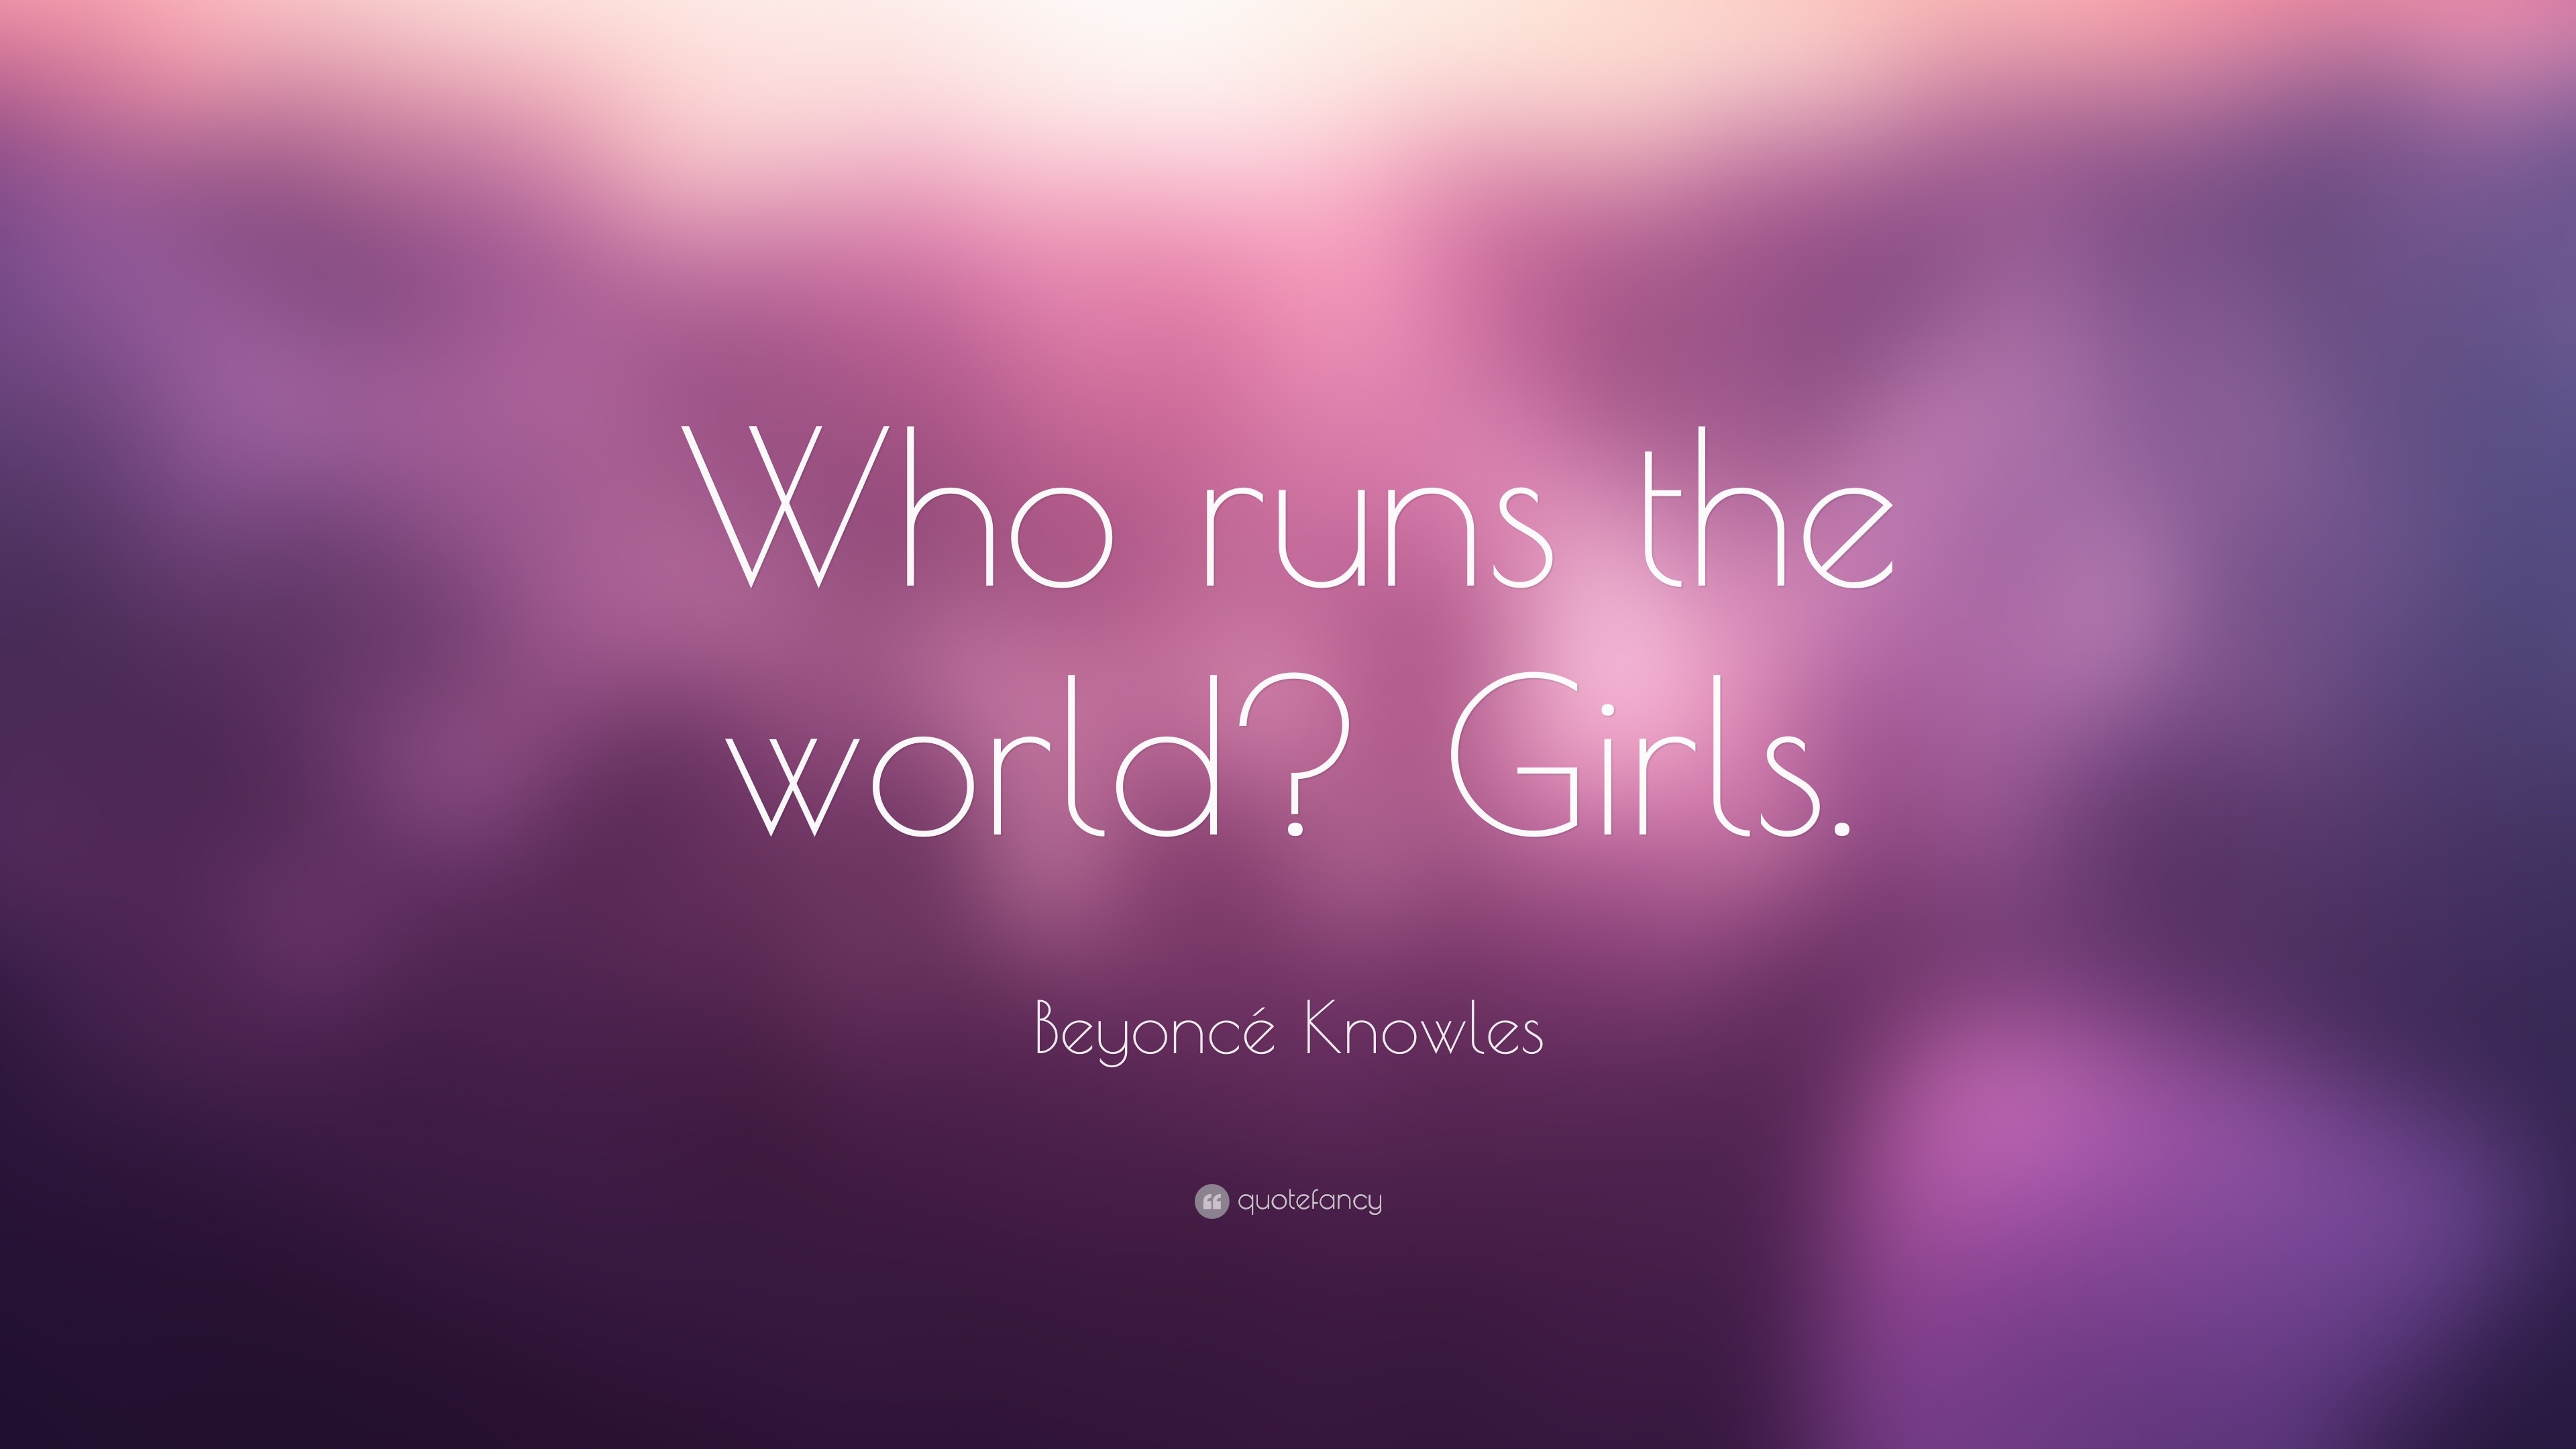 beyonce knowles quotes